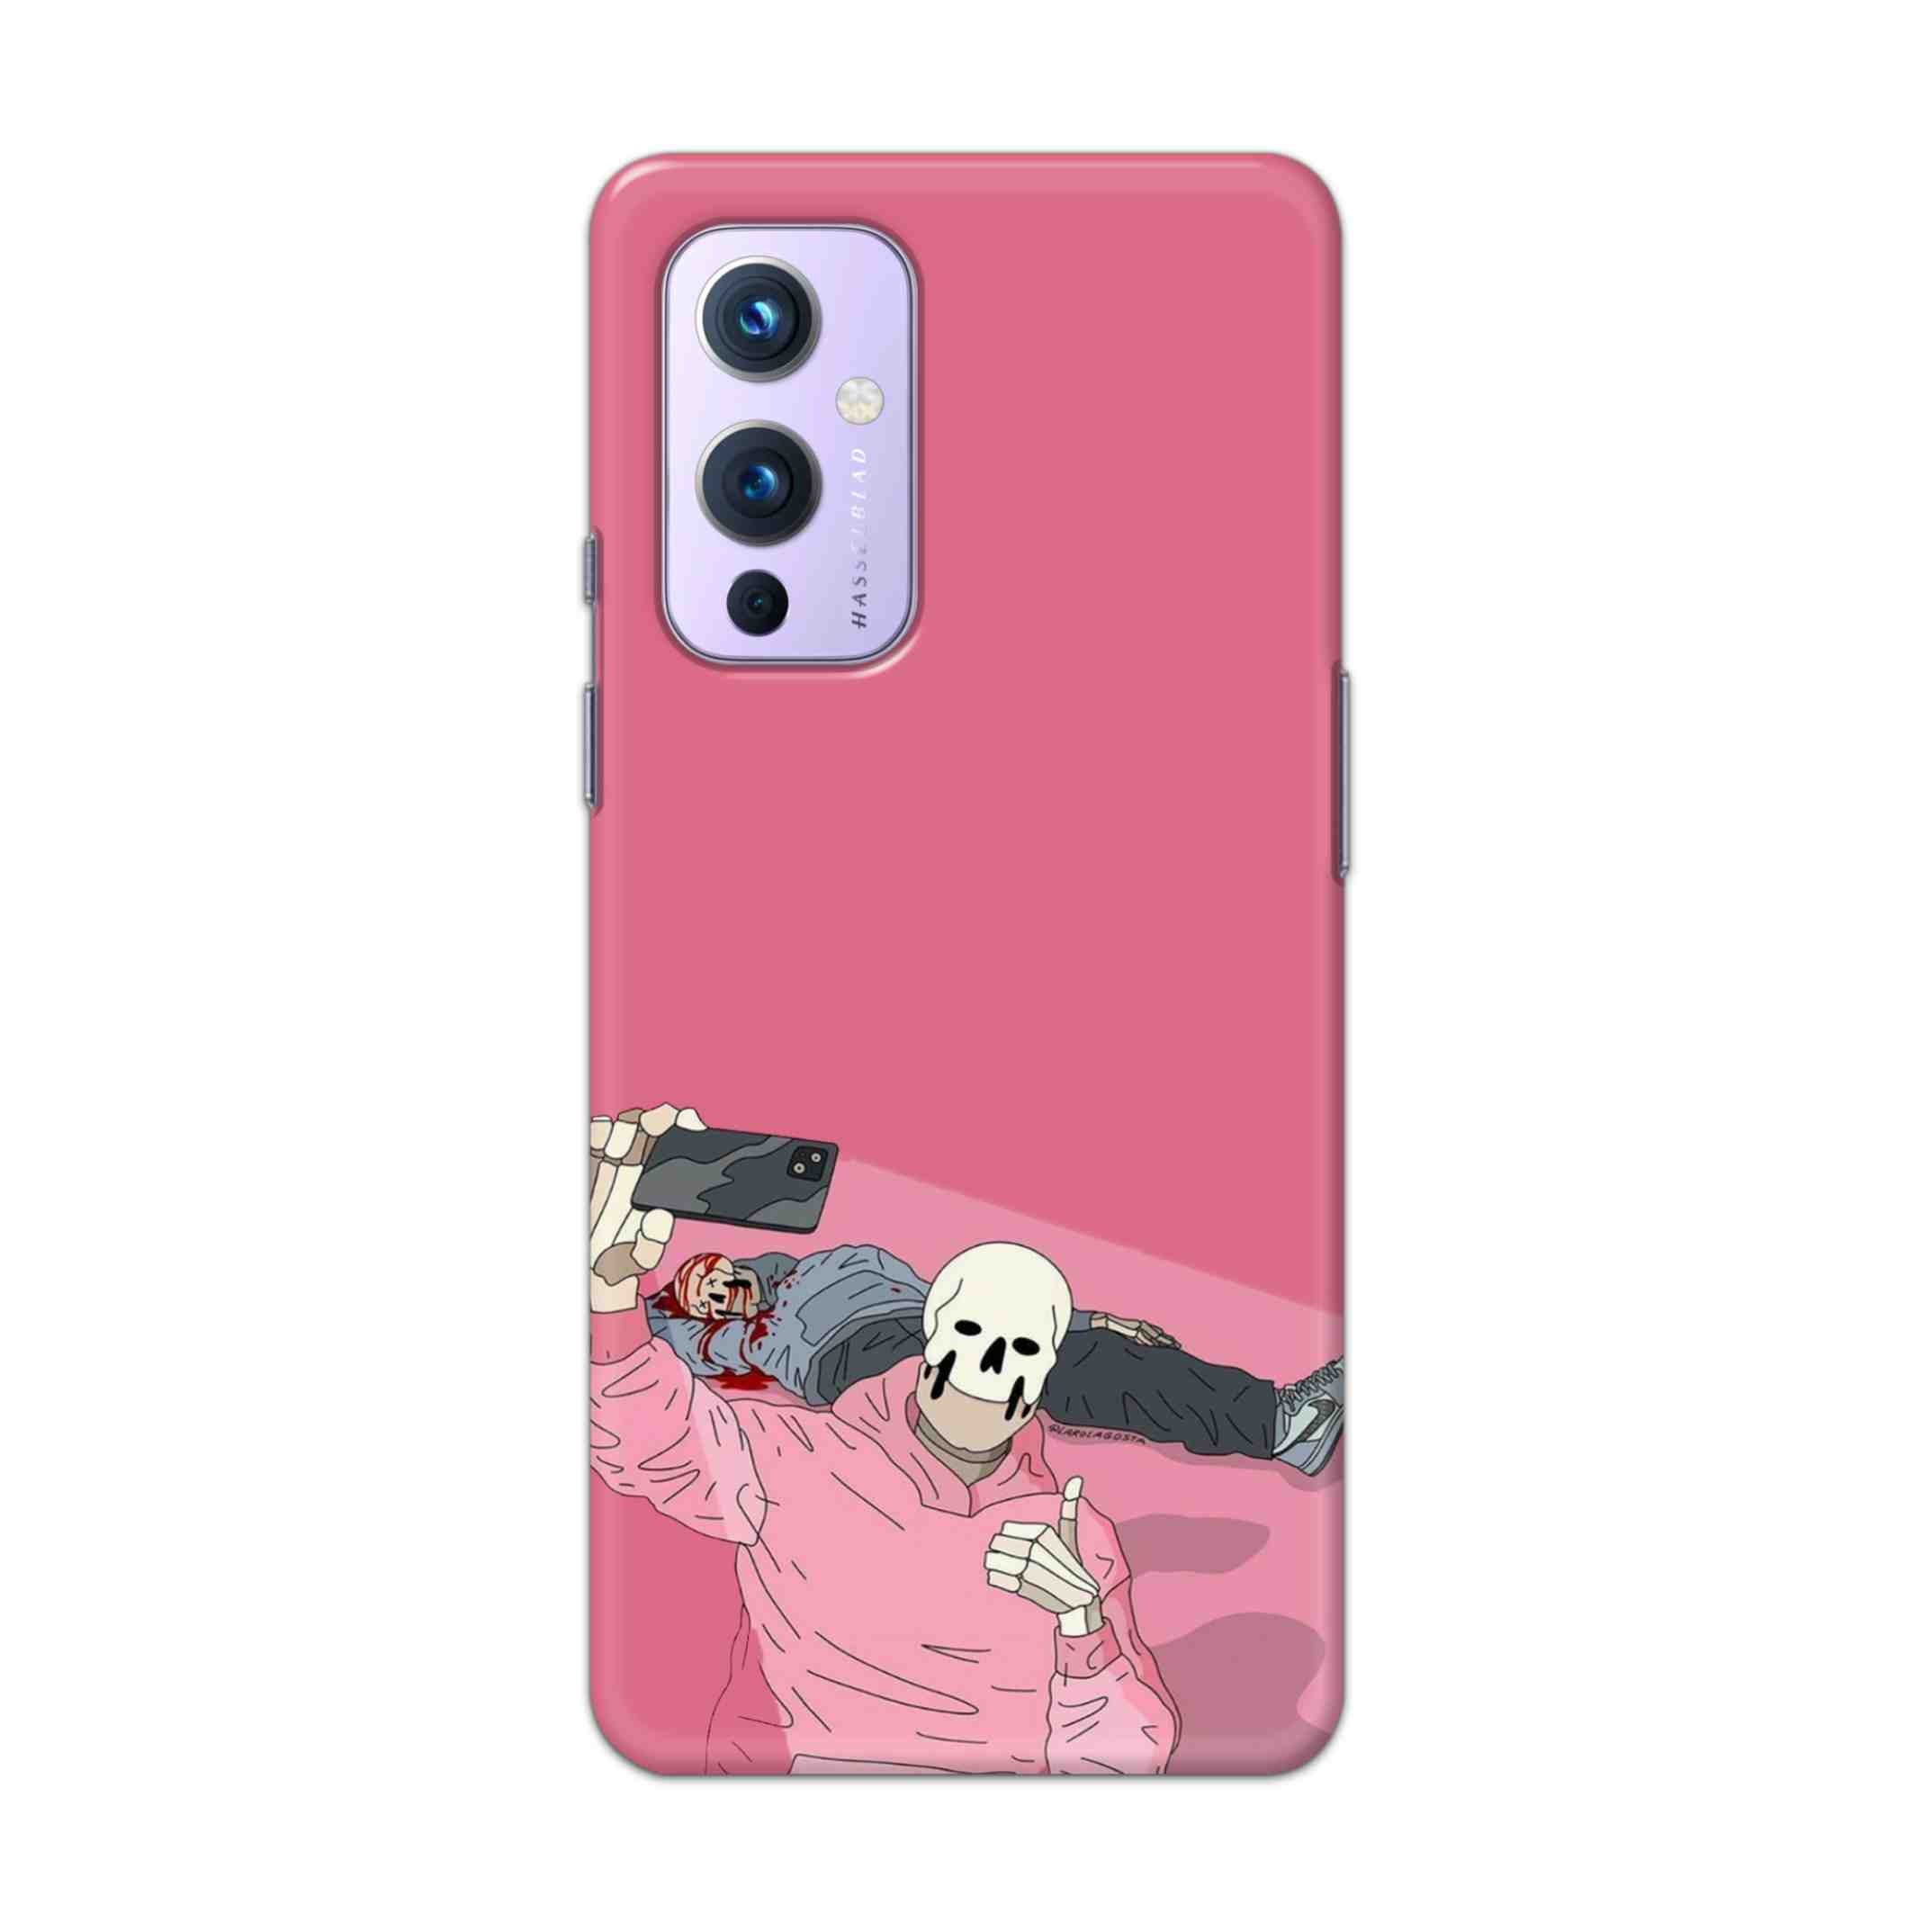 Buy Selfie Hard Back Mobile Phone Case Cover For OnePlus 9 Online